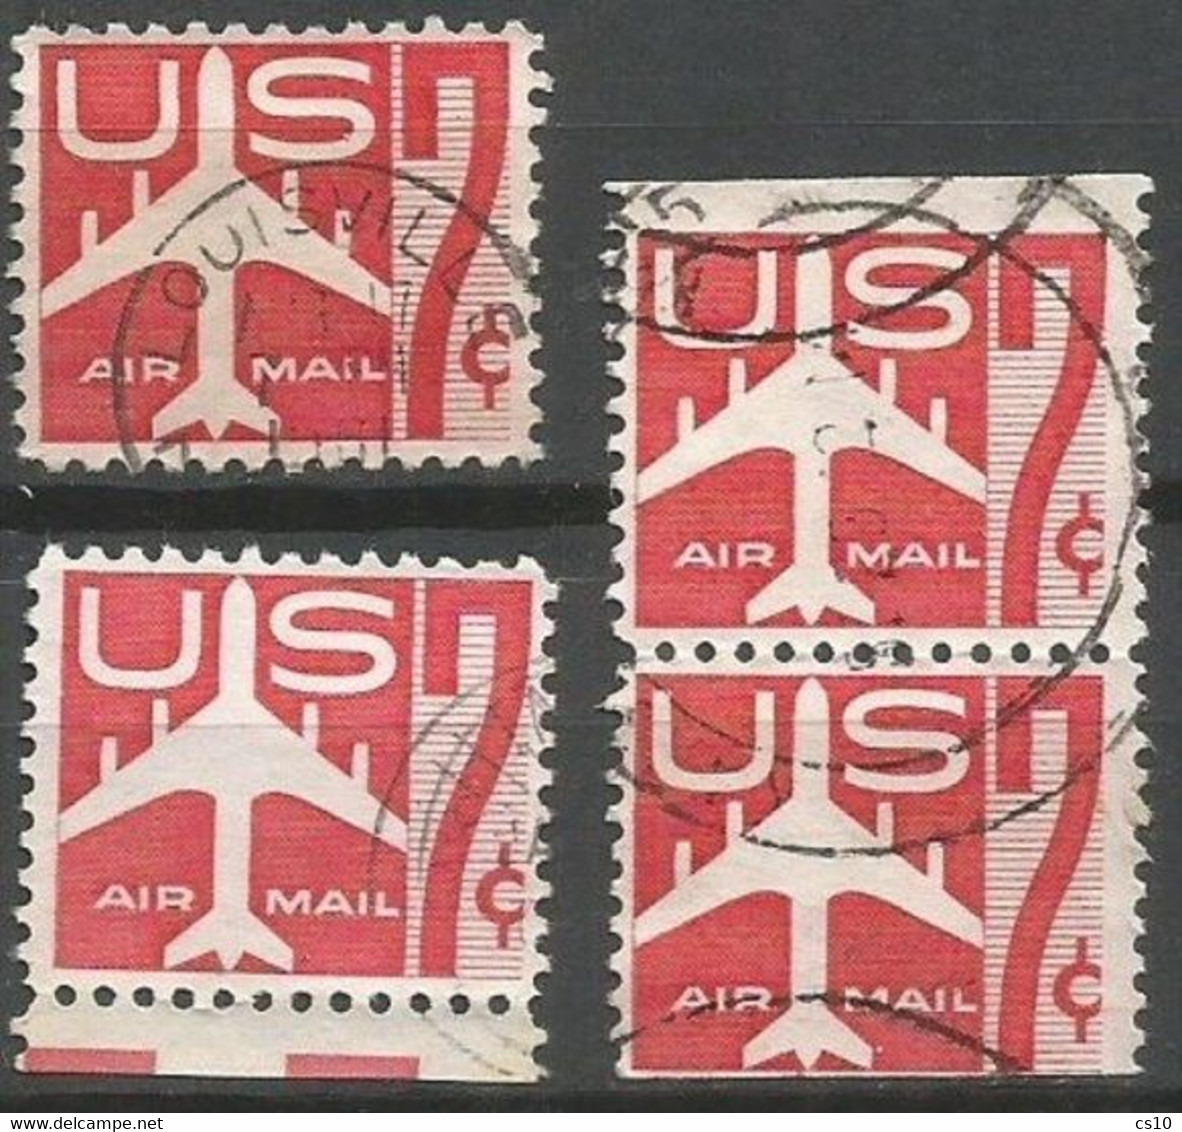 USA Airpost Air Mail 1960 Jet Airliner (red) Single + Corner + Booklet 3+3 Pair SC.#C60 - VFU Condition - 2a. 1941-1960 Usados